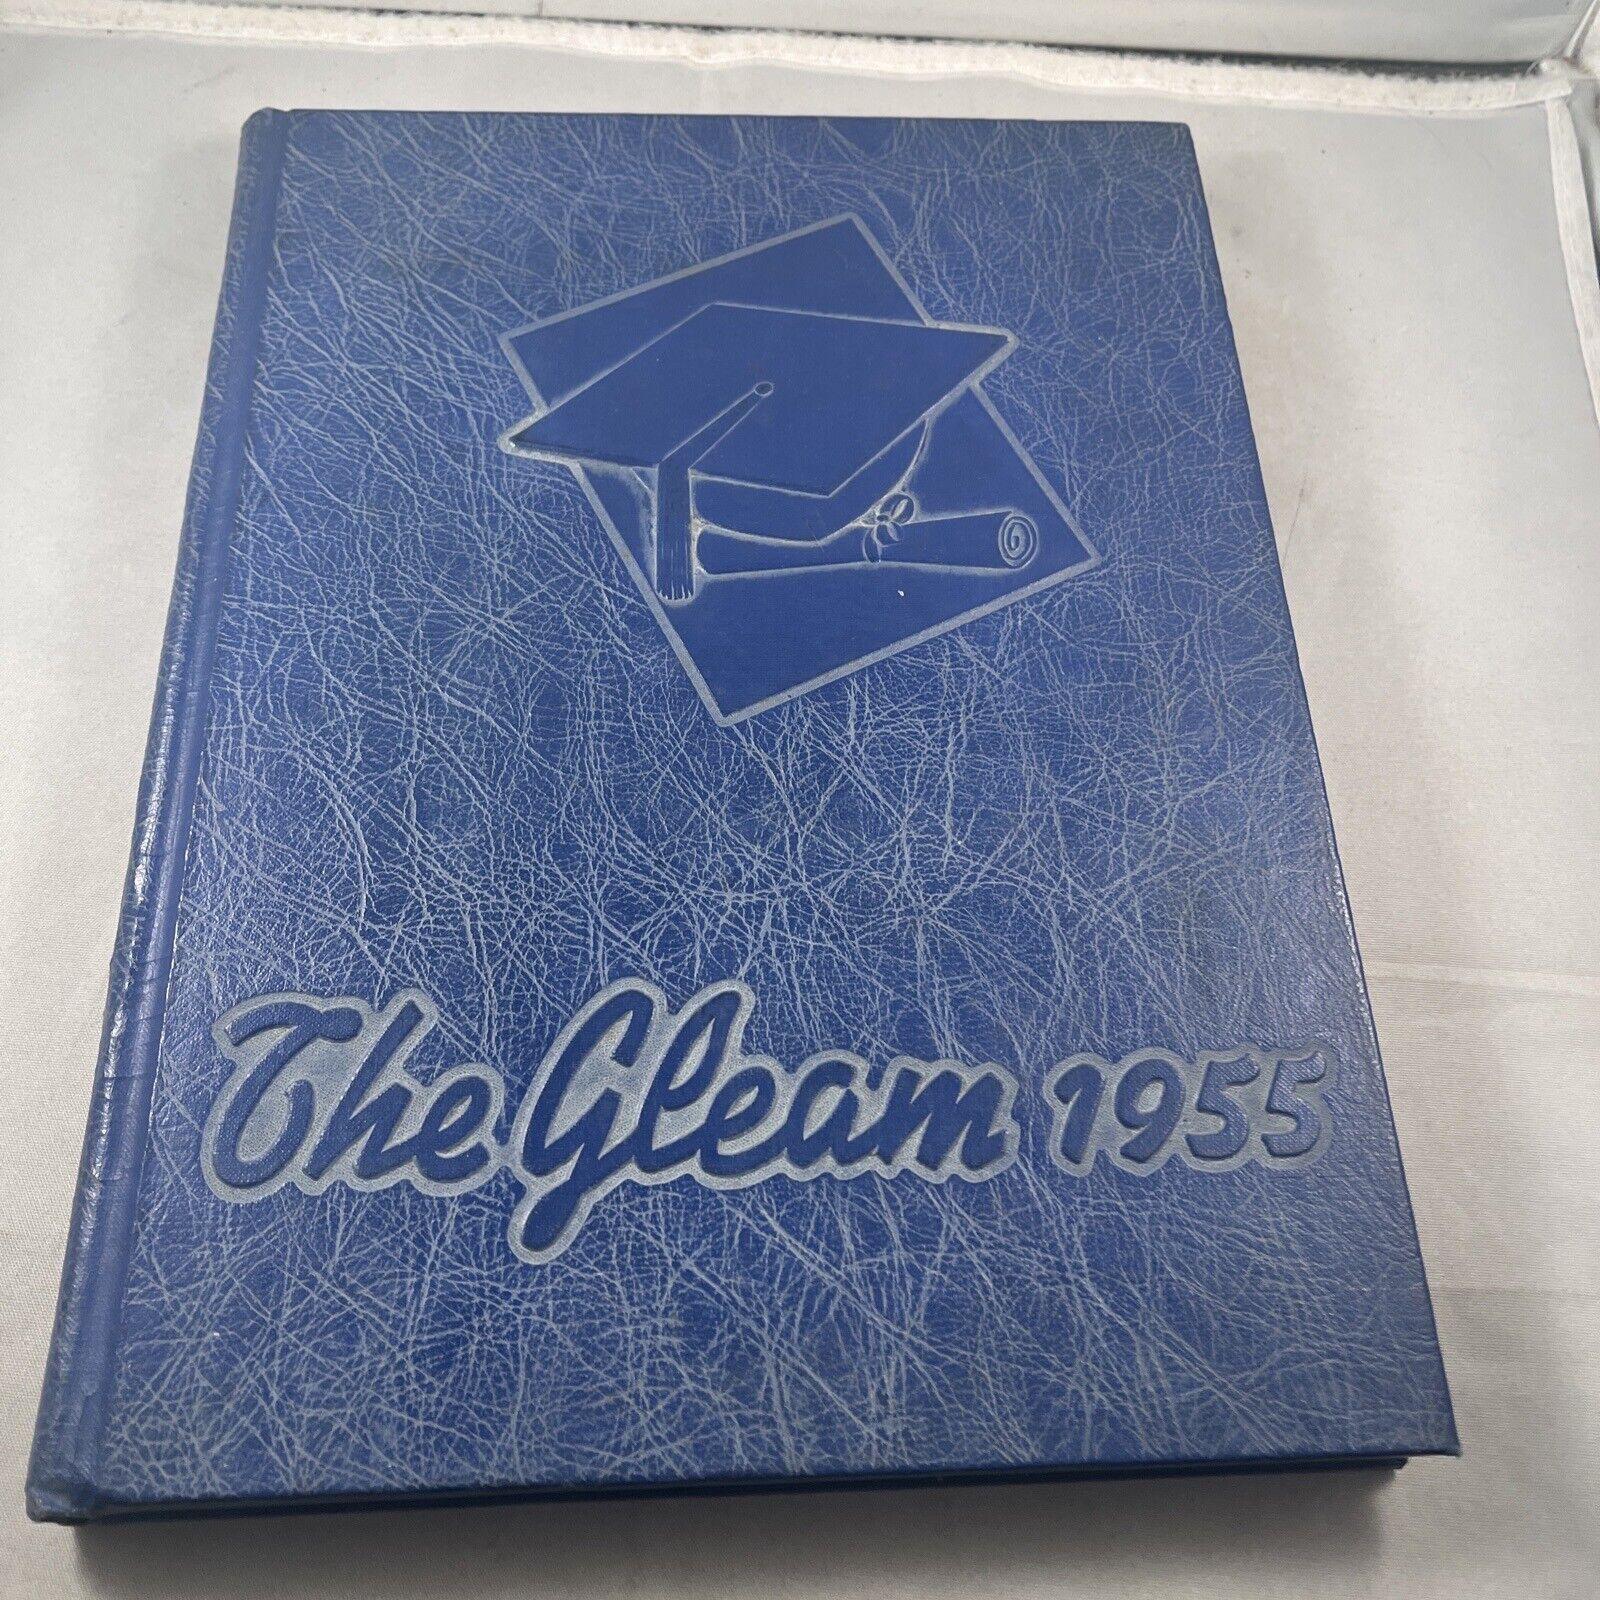 1955 William Chrisman High School Annual Yearbook The Gleam Independence MO